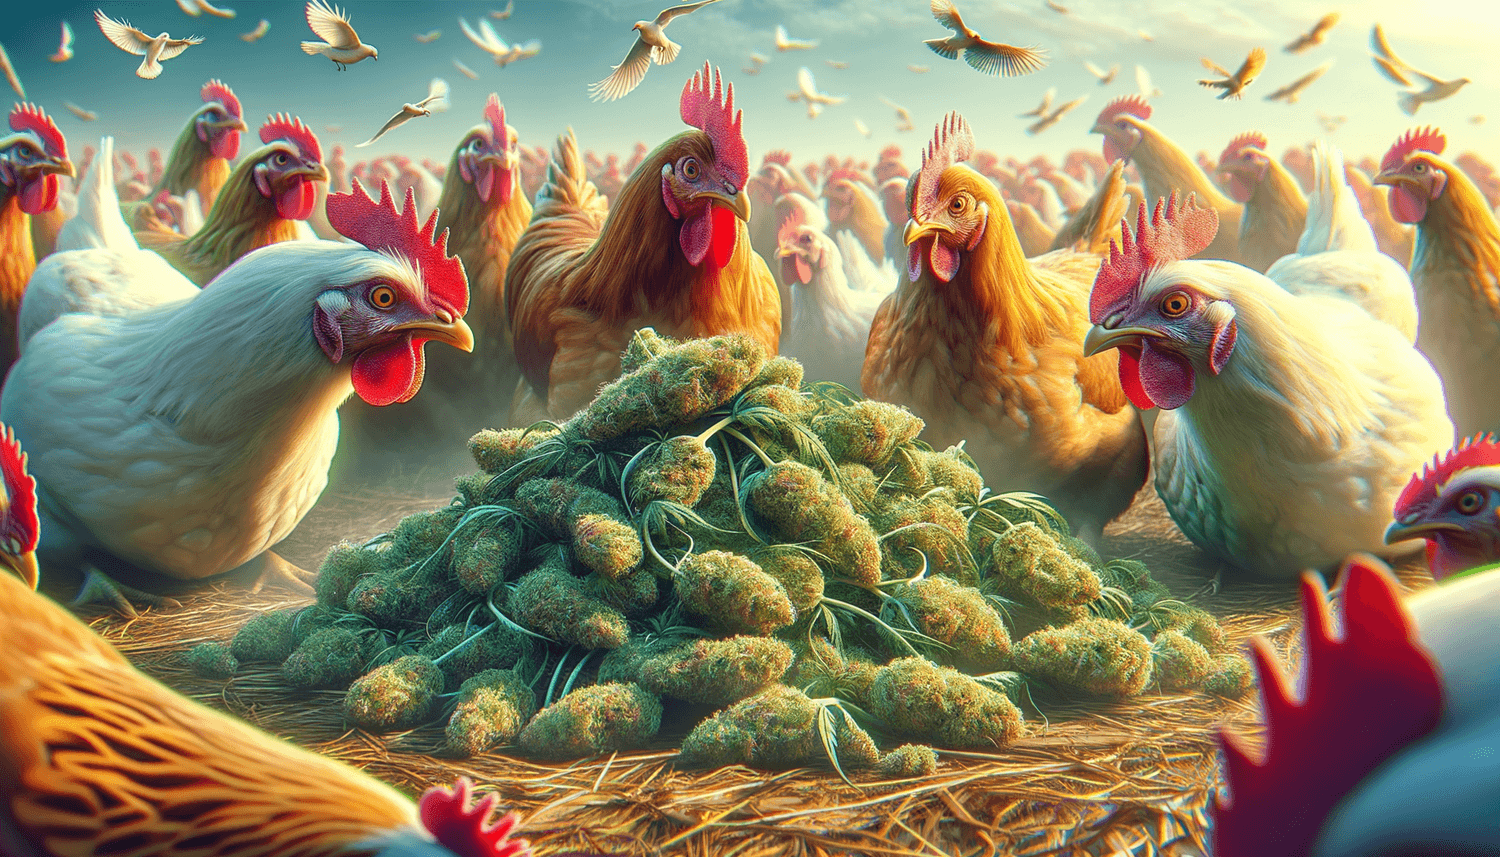 Can Chickens Eat Weed?